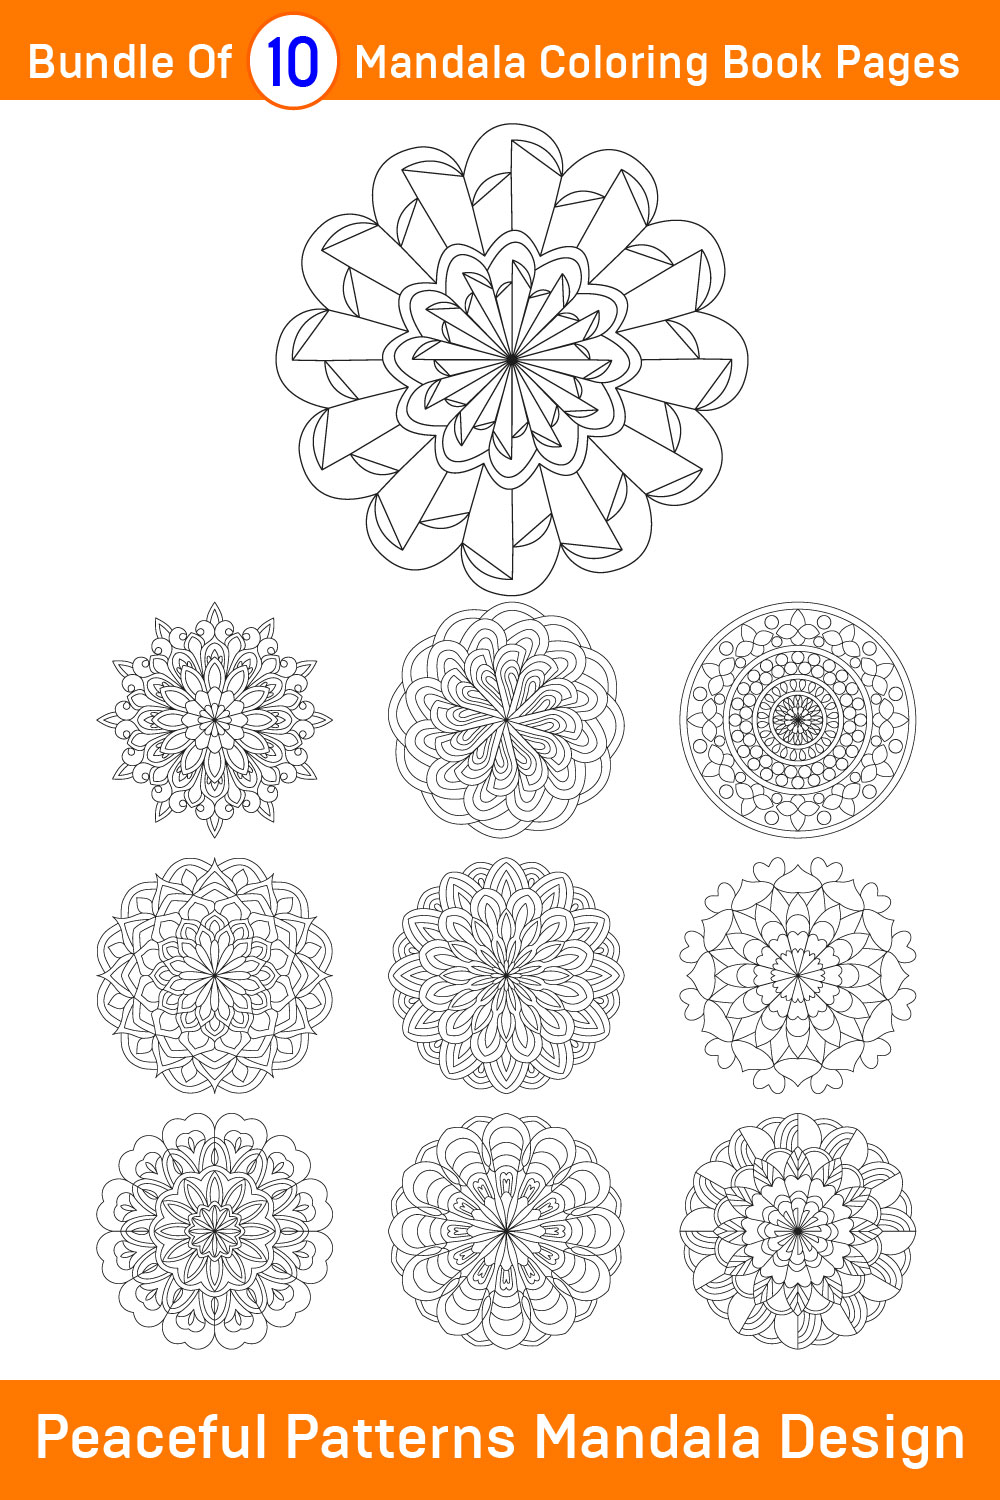 Bundle of 10 Peaceful Patterns Mandala for KDP Colouring Book interior Pages pinterest preview image.